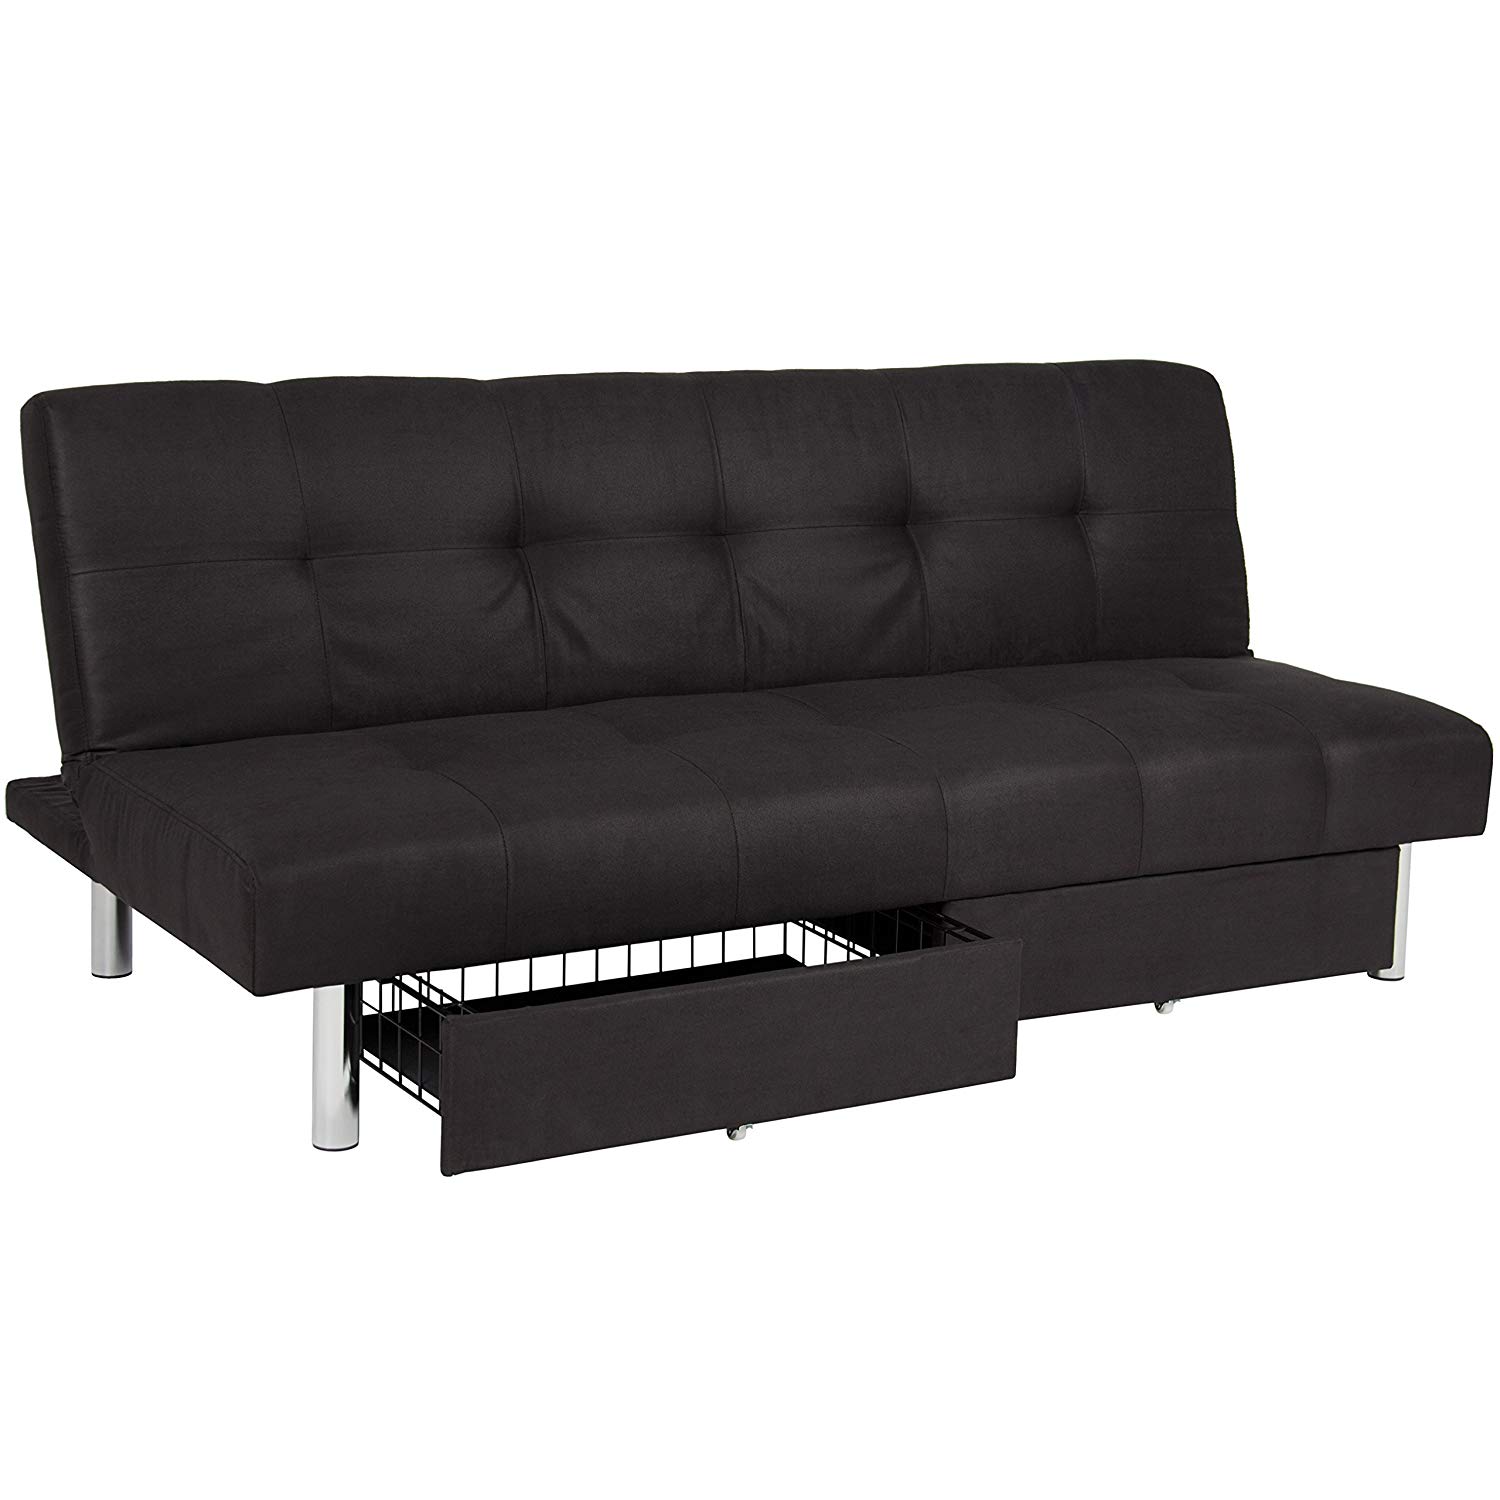 Futon Couch amazon.com: best choice products Microfiber Futon Folding Sofa Bed Couch with Mattress WVLKFXC